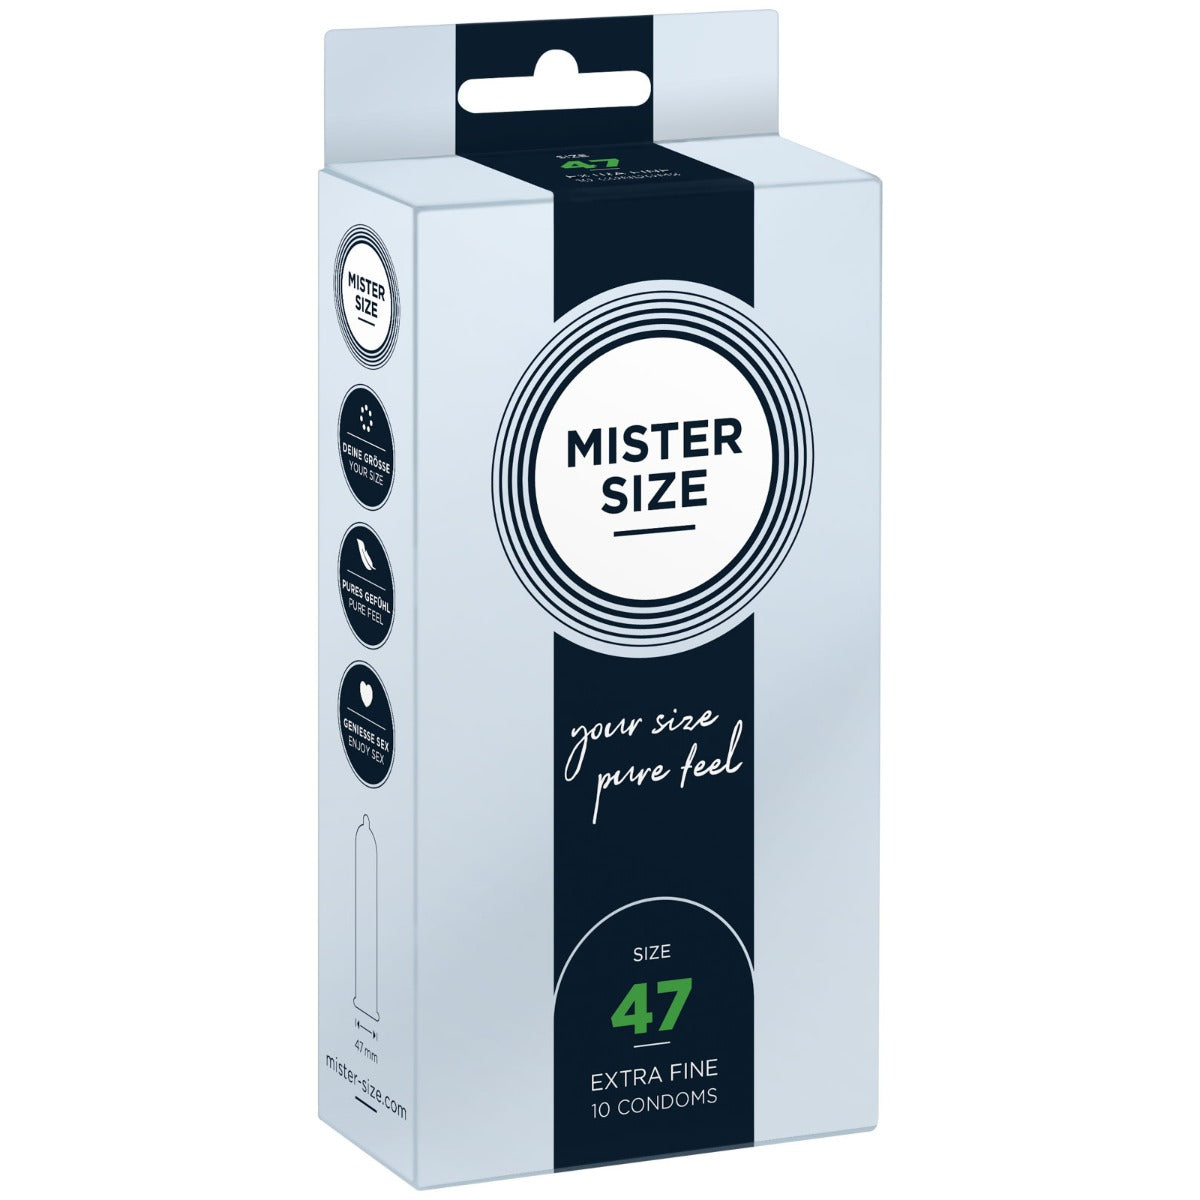 Condoms MISTER SIZE - pure feel Condoms - size 47 mm (10 pack)   